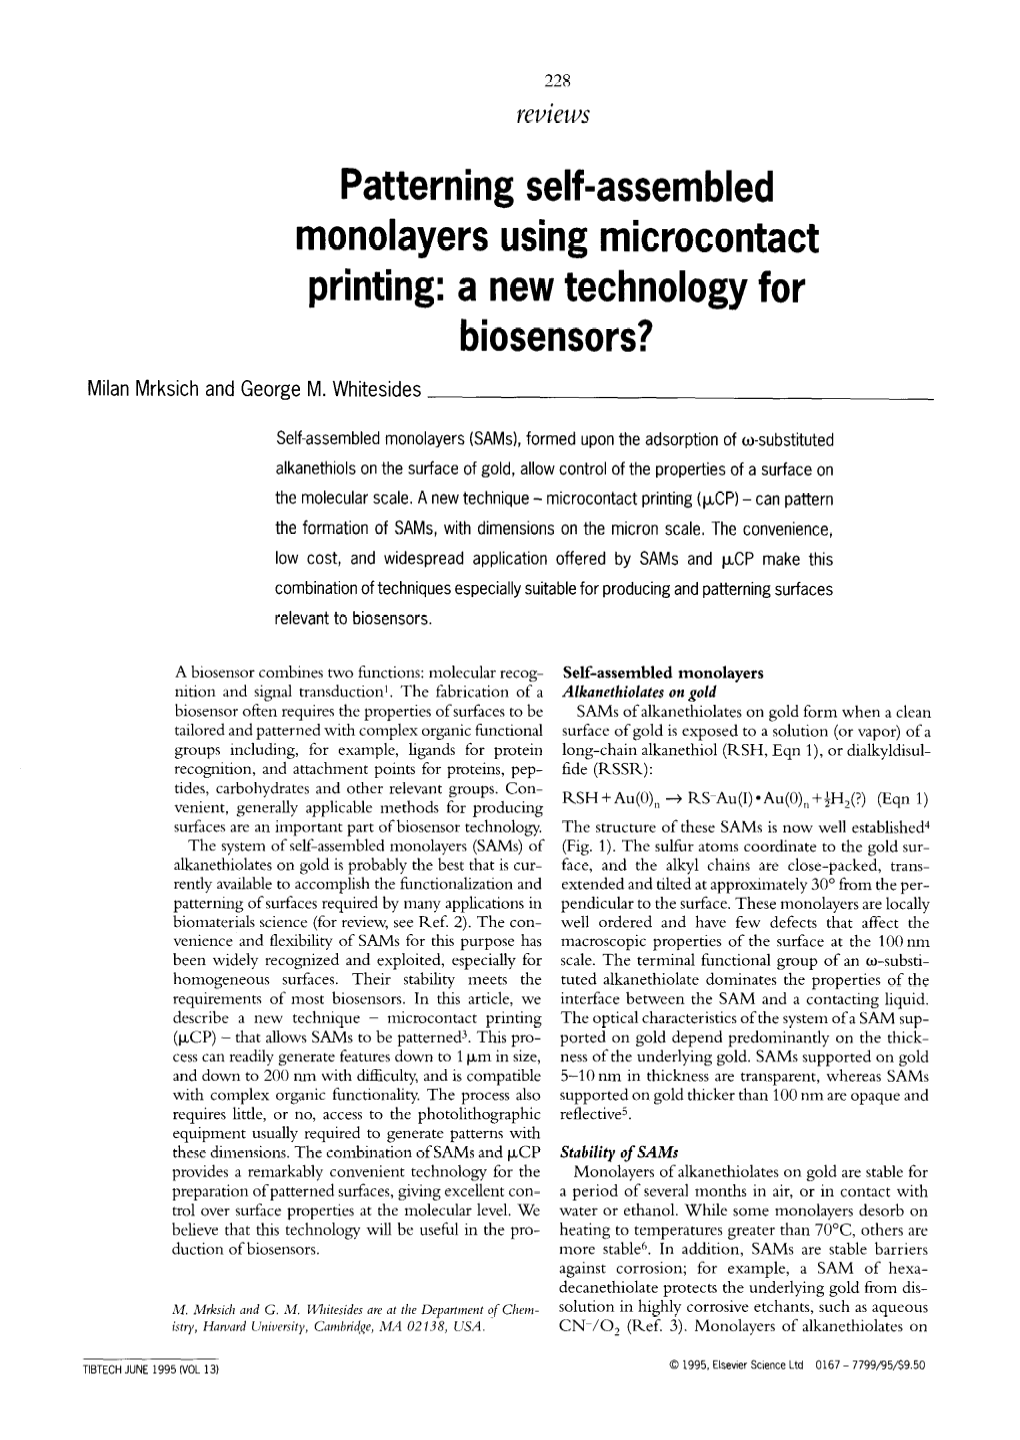 Patterning Self-Assembled Monolayers Using Microcontact Printing: a New Technology for Biosensors? Milan Mrksich and George M